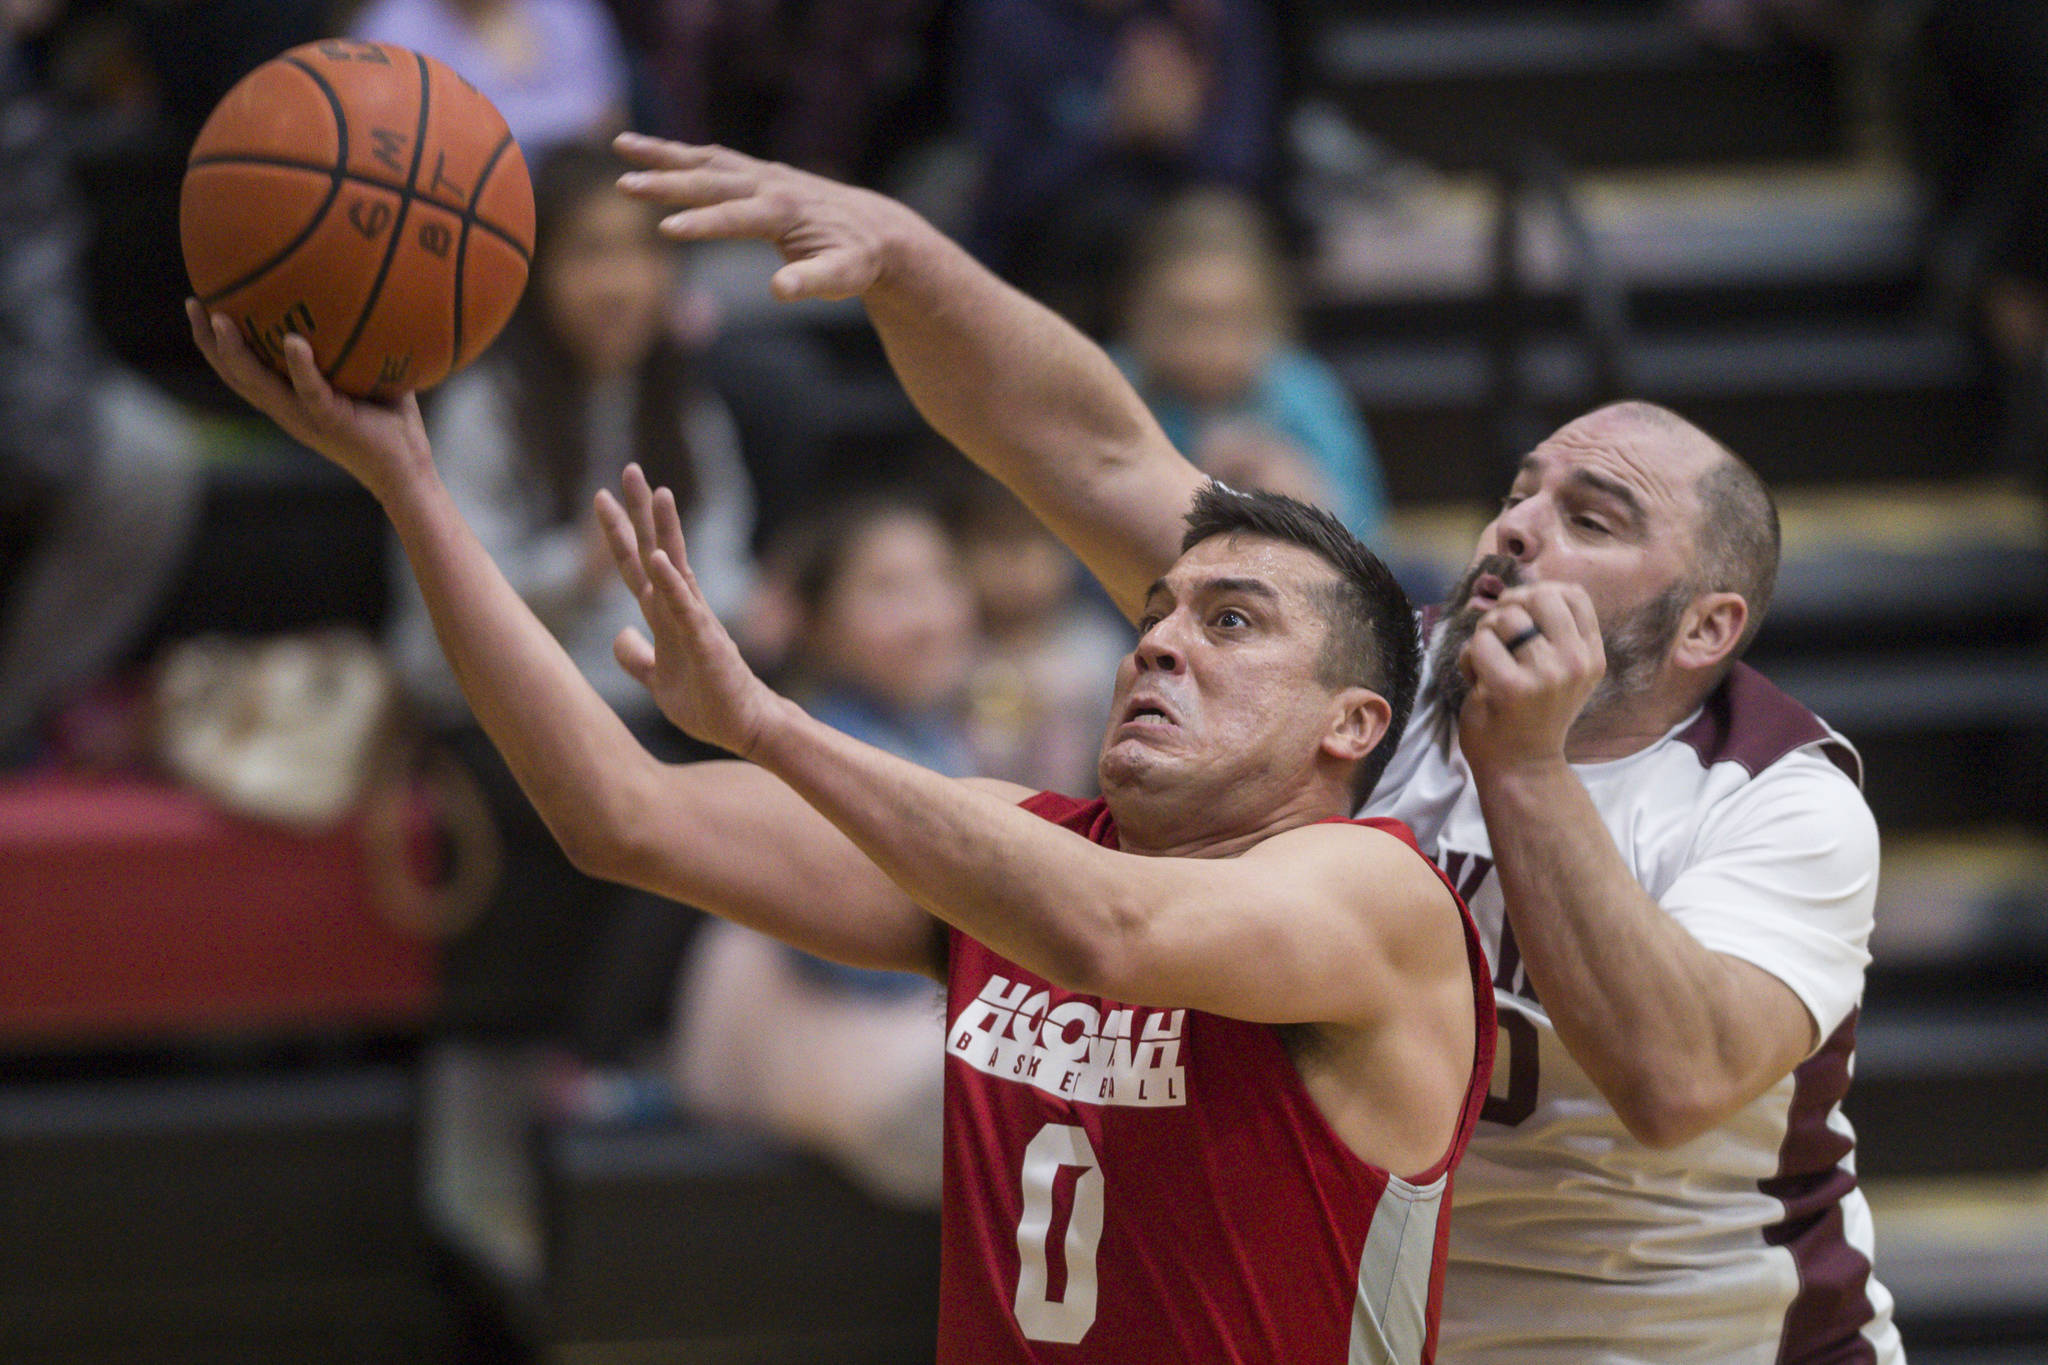 Hoonah’s Anthony Lindoff, left, scores in front of Klukwan’s Stuart DeWitt during their C bracket game at the Juneau Lions Club 73rd Annual Gold Medal Basketball Tournament at Juneau-Douglas High School on Friday, March 22, 2019. Klukwan won 88-67. (Michael Penn | Juneau Empire)